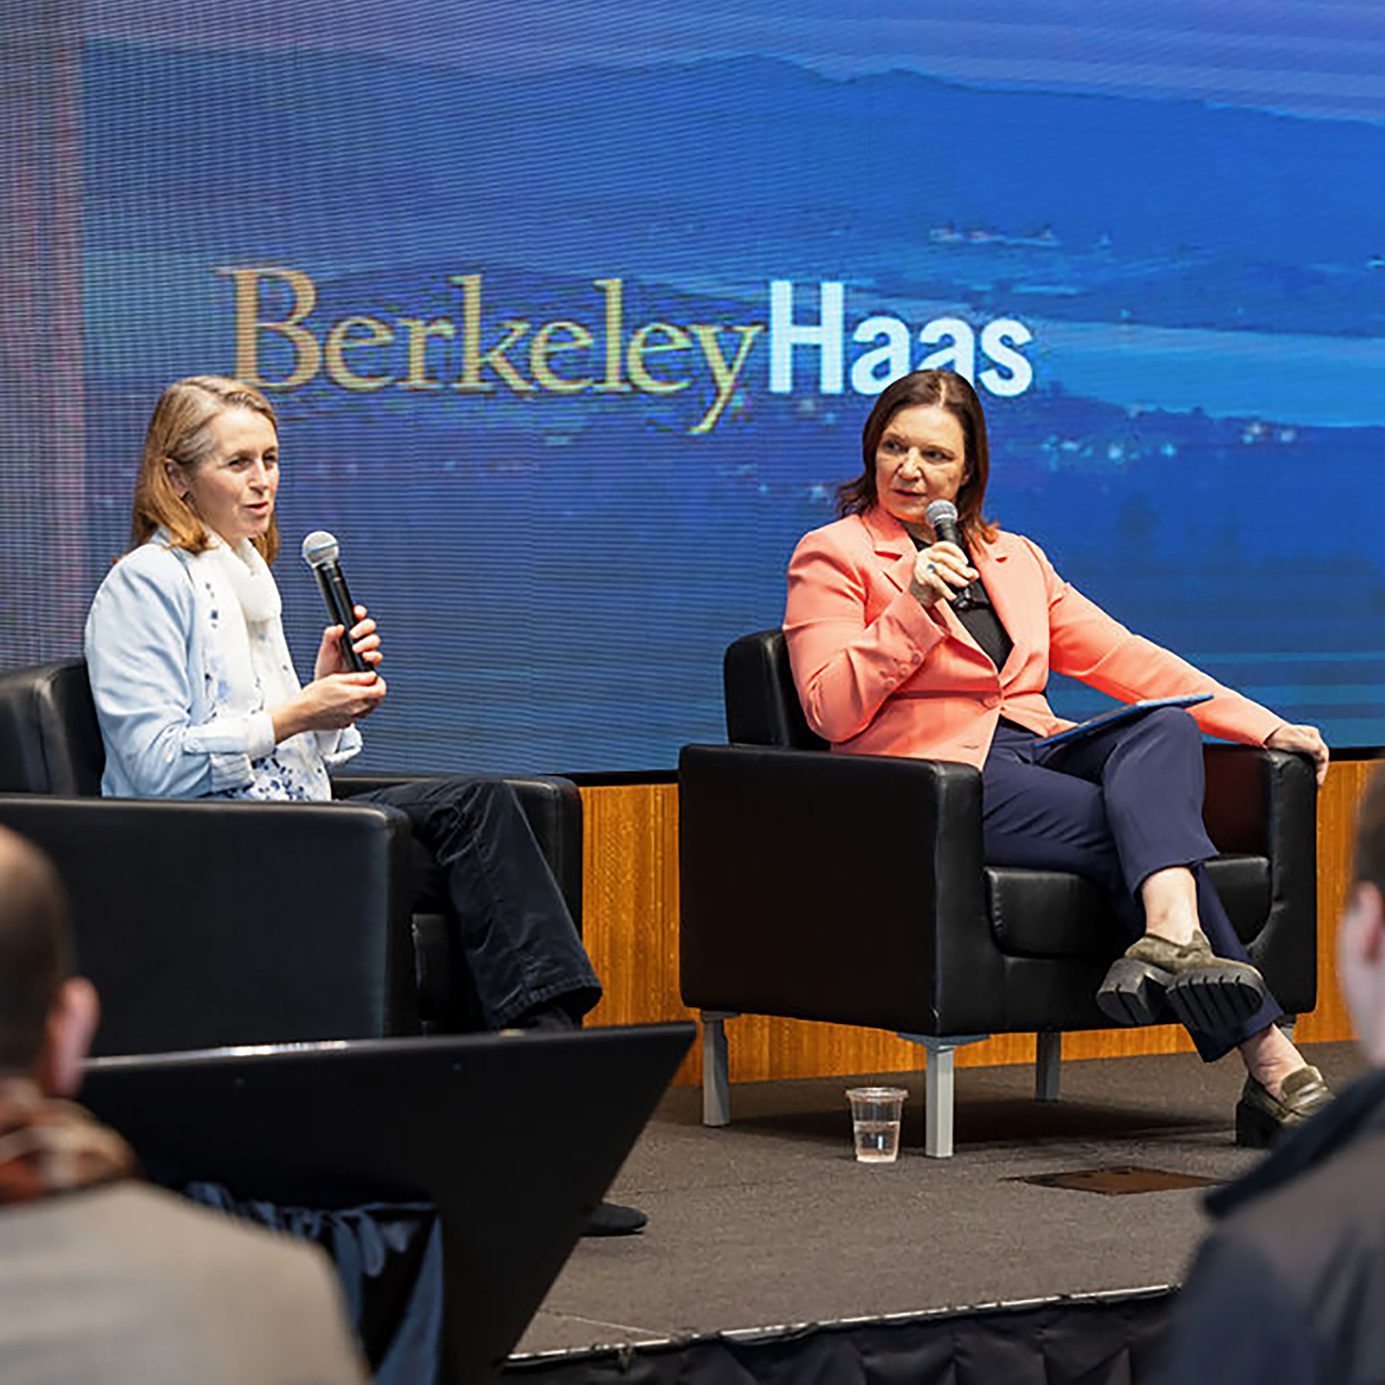 Dean Ann Harrison holds a microphone to interview Professor Catherine Wolfram on stage at Spieker Forum, Haas School of Business.